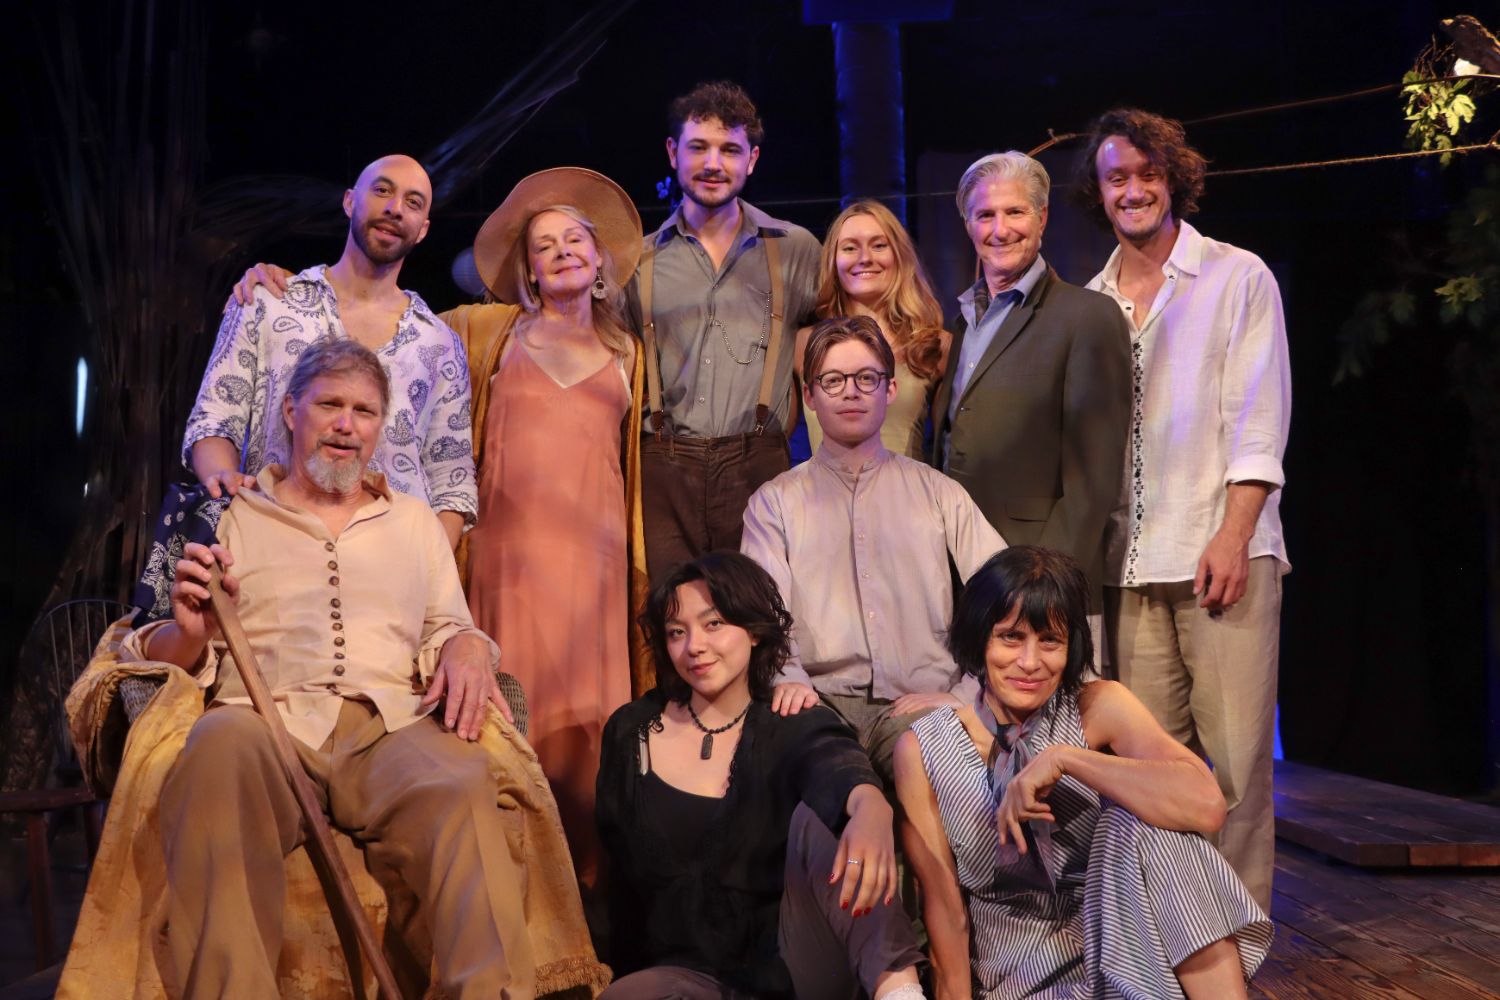 PHOTO: South Pasadena Theatre Workshop | The South Pasadenan | The cast of The Seagull. (clockwise from bottom left) Clay Wilcox, Kila Packett, Sally Smythe, Sam Cass, Cordelia Dewdney, Kevin Michael Moran, Andrew Tippie, Christina Conte, Nick Apostolina, Fiona Rose Dyer. 